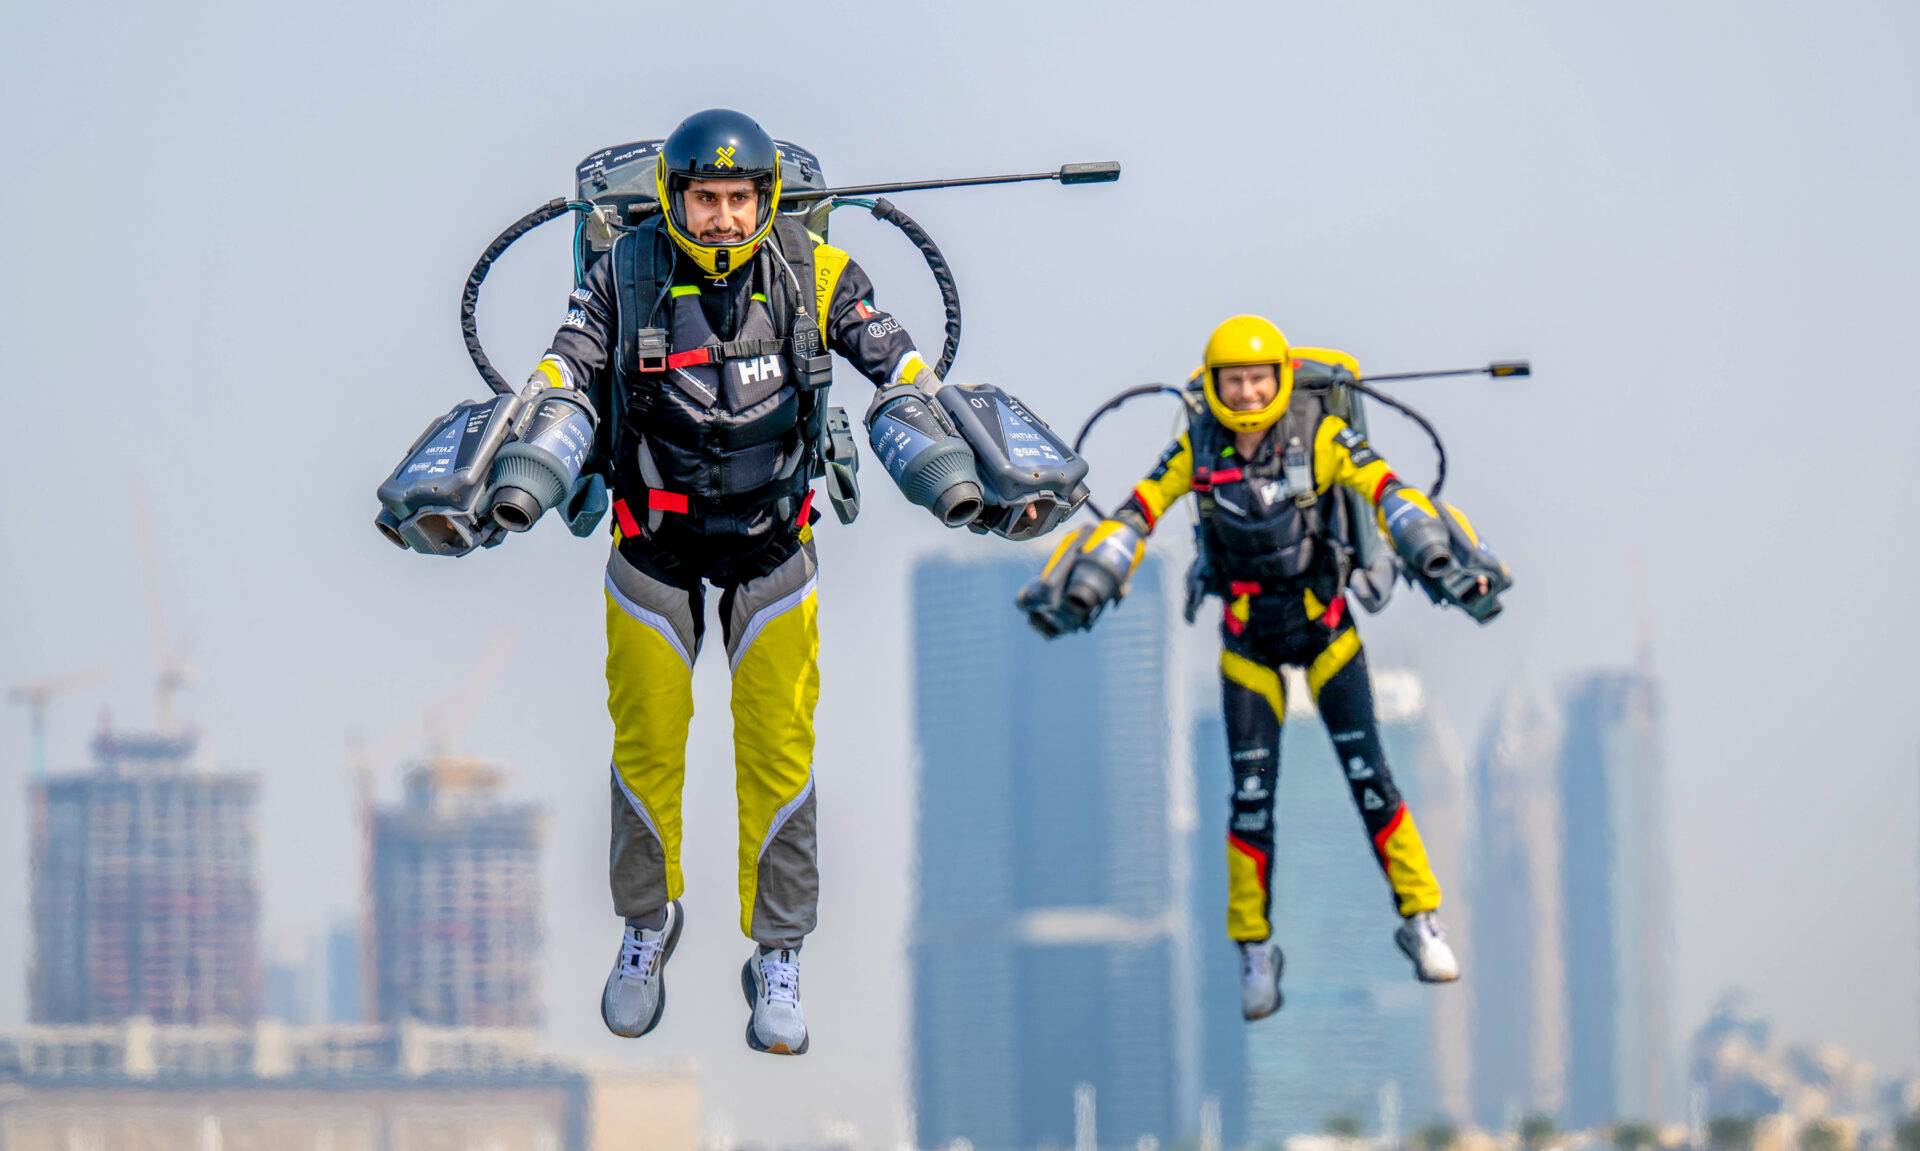 Pilots lift off during the Dubai Jet Suit Championship on Wednesday. The first event of its kind anywhere in the world, the race was organized by the Dubai Sports Council and Gravity Industries in cooperation with the Skydive Dubai Club and XDubai. (Photo: Getty Images)